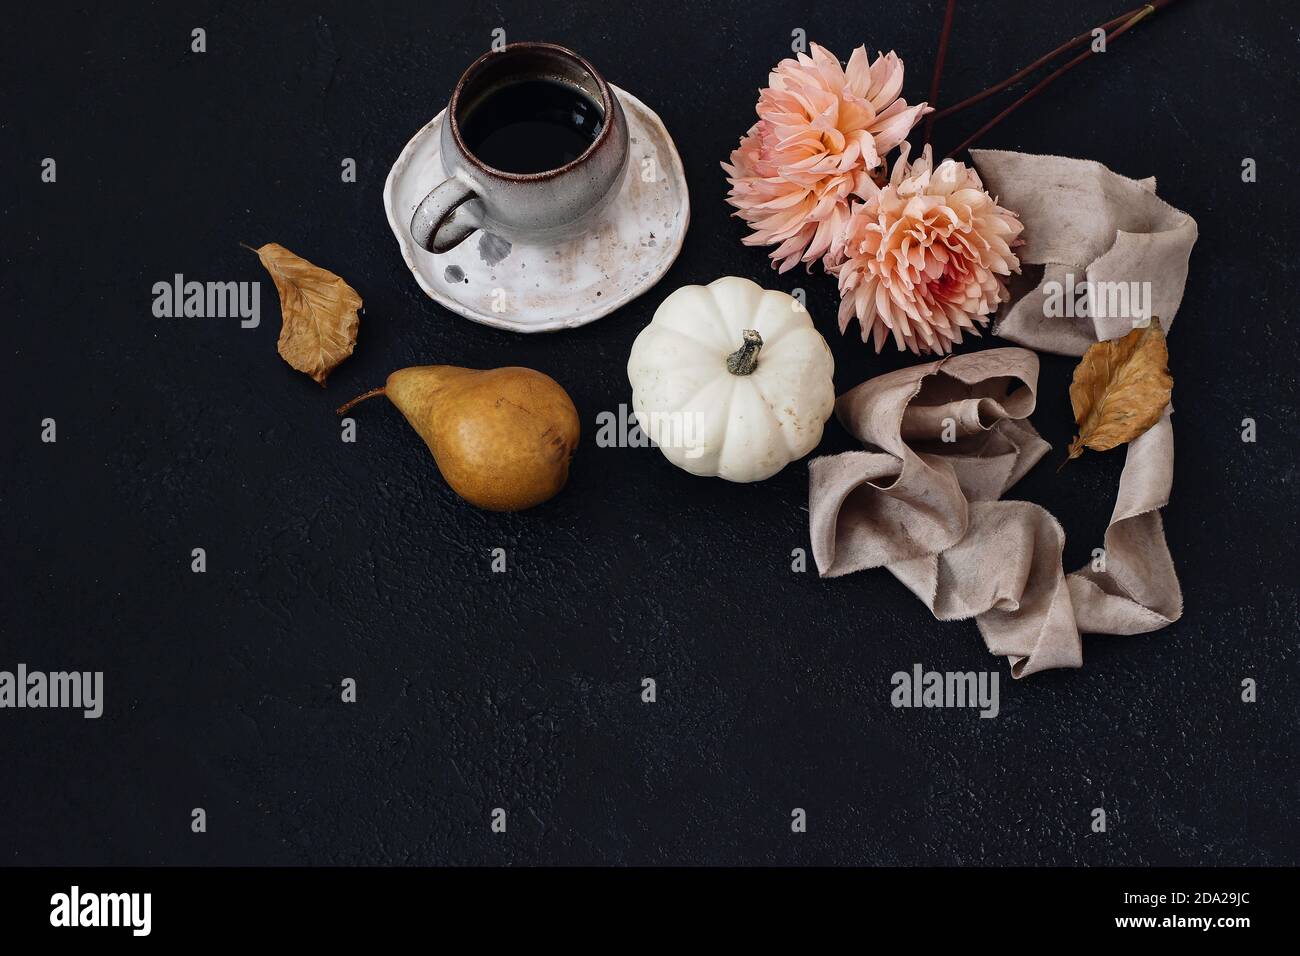 Autumn still life composition. Cup of coffee, pear fruit and white pumpkins with pink dahlia flowers. Black table background. Beech leaves. Moody fall Stock Photo